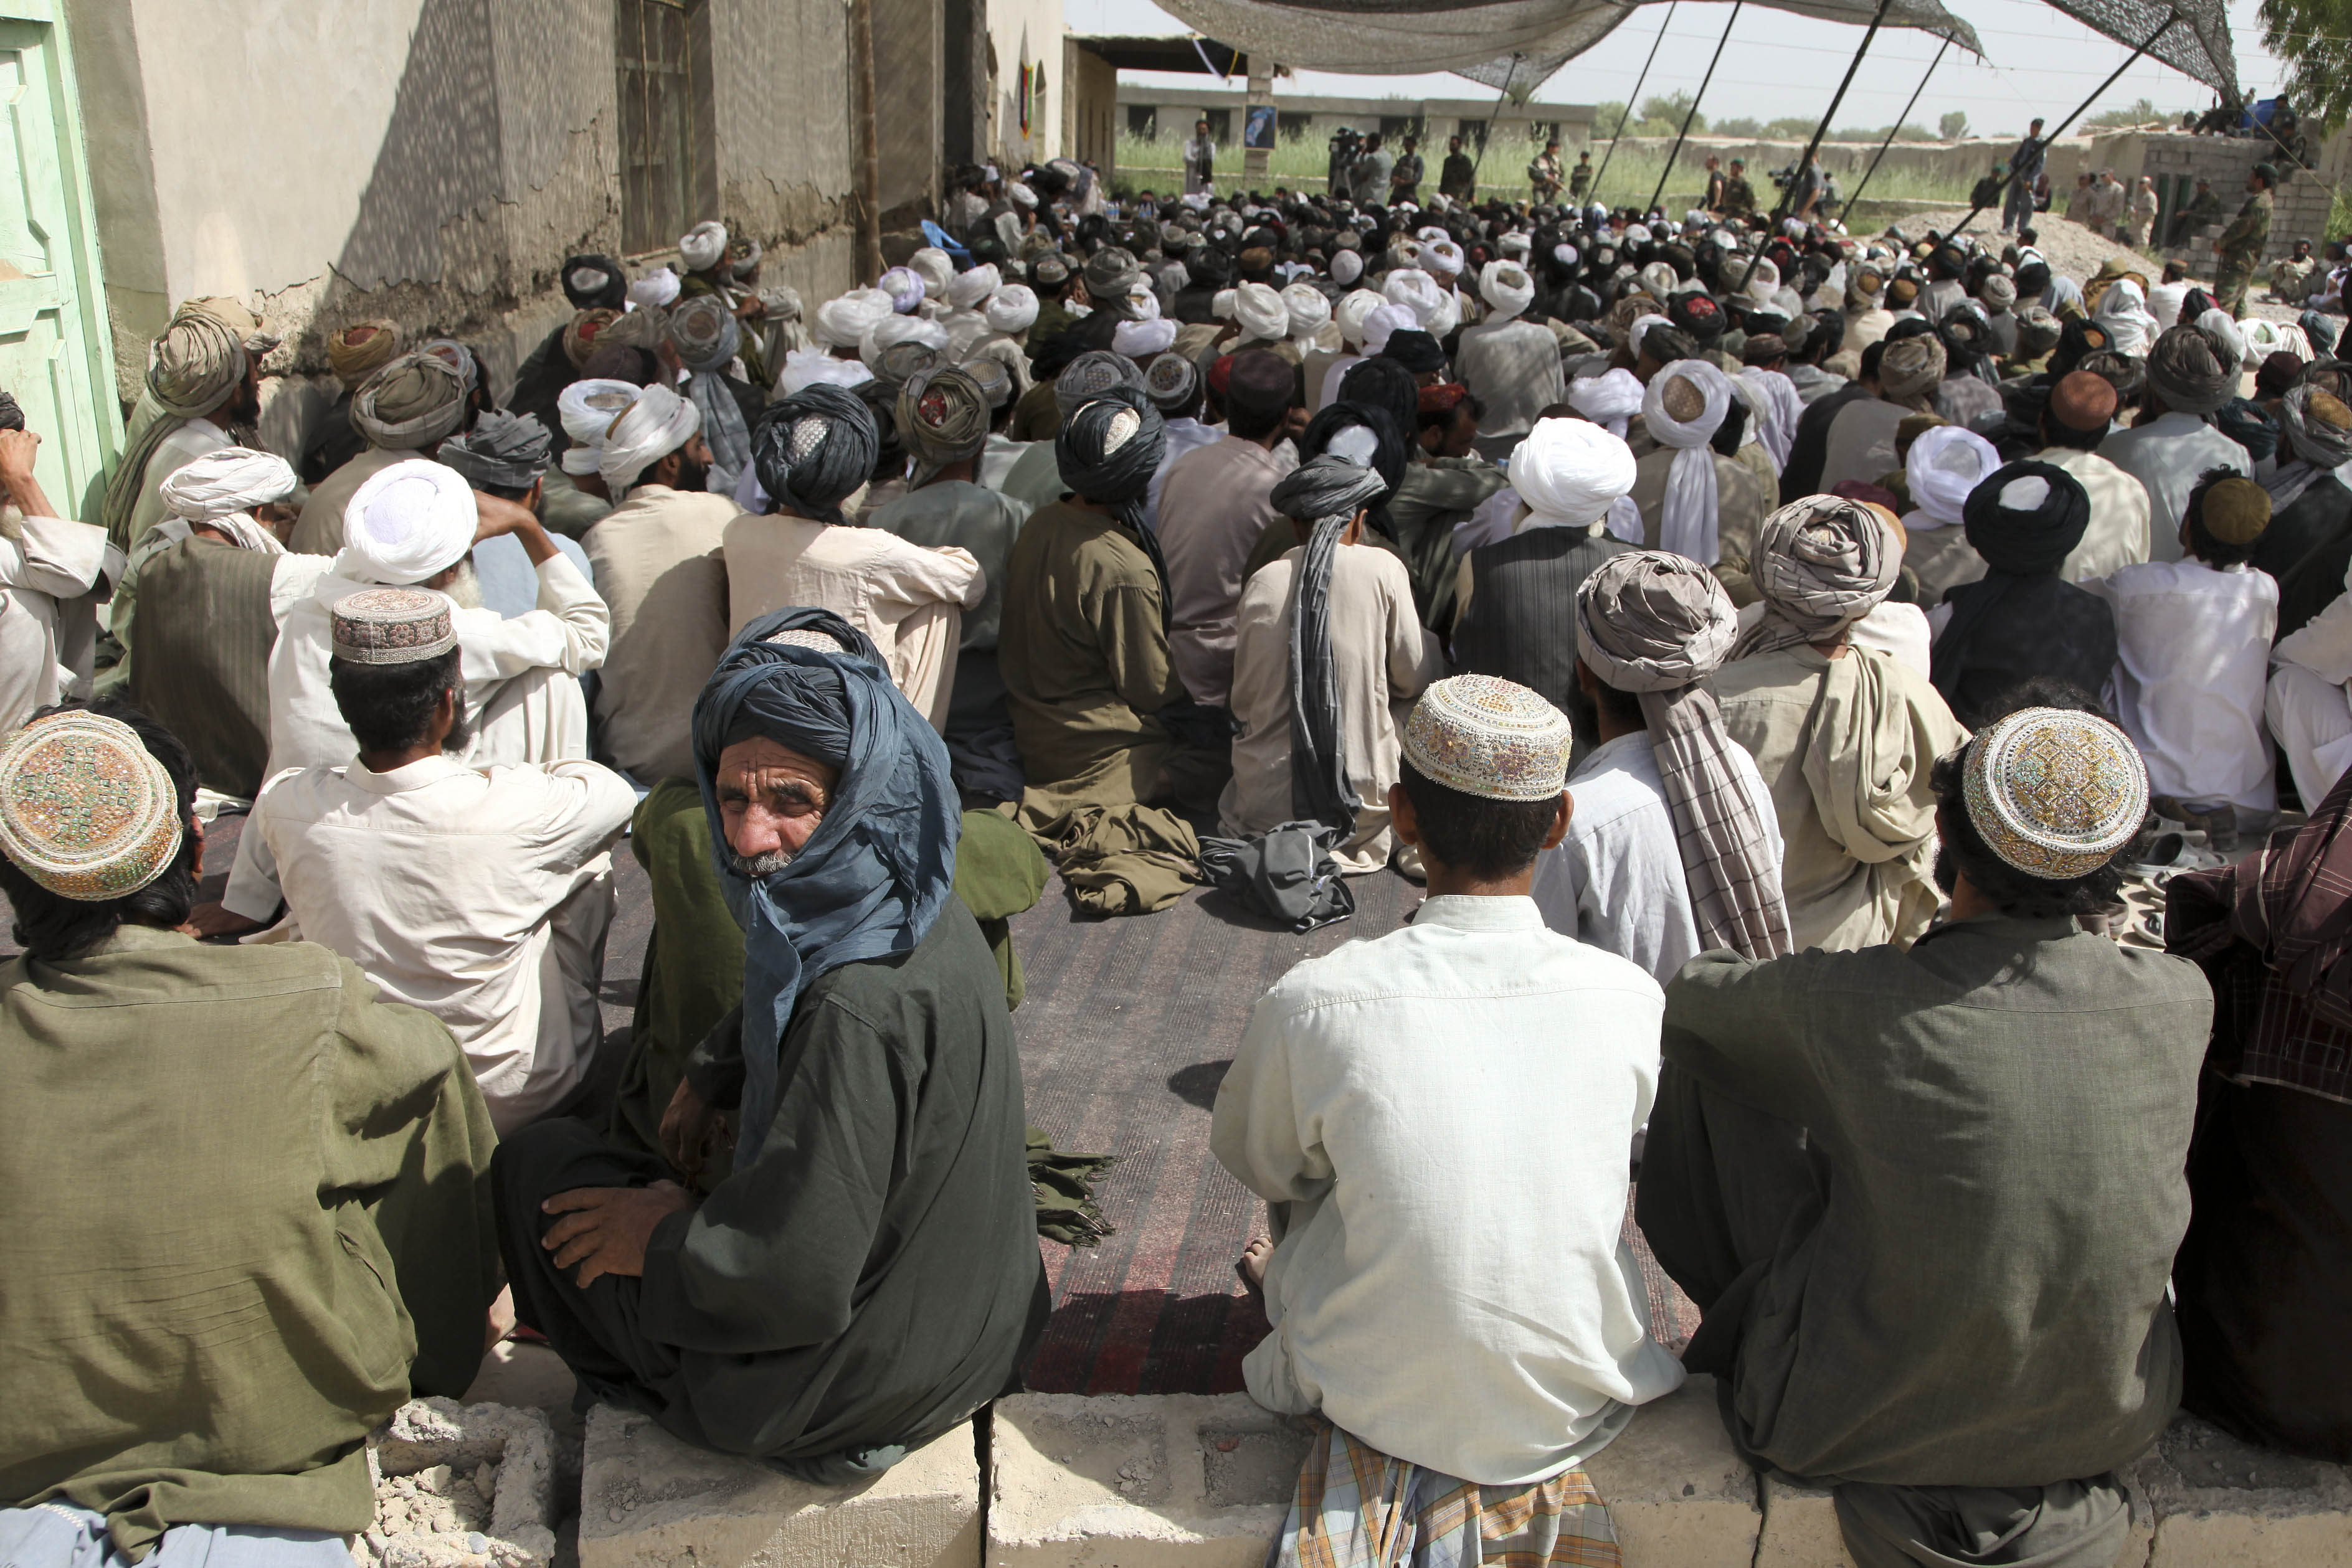 local afghan men attend a shura in the nawa district helmand province afghanistan on july 23 2009 afp photo